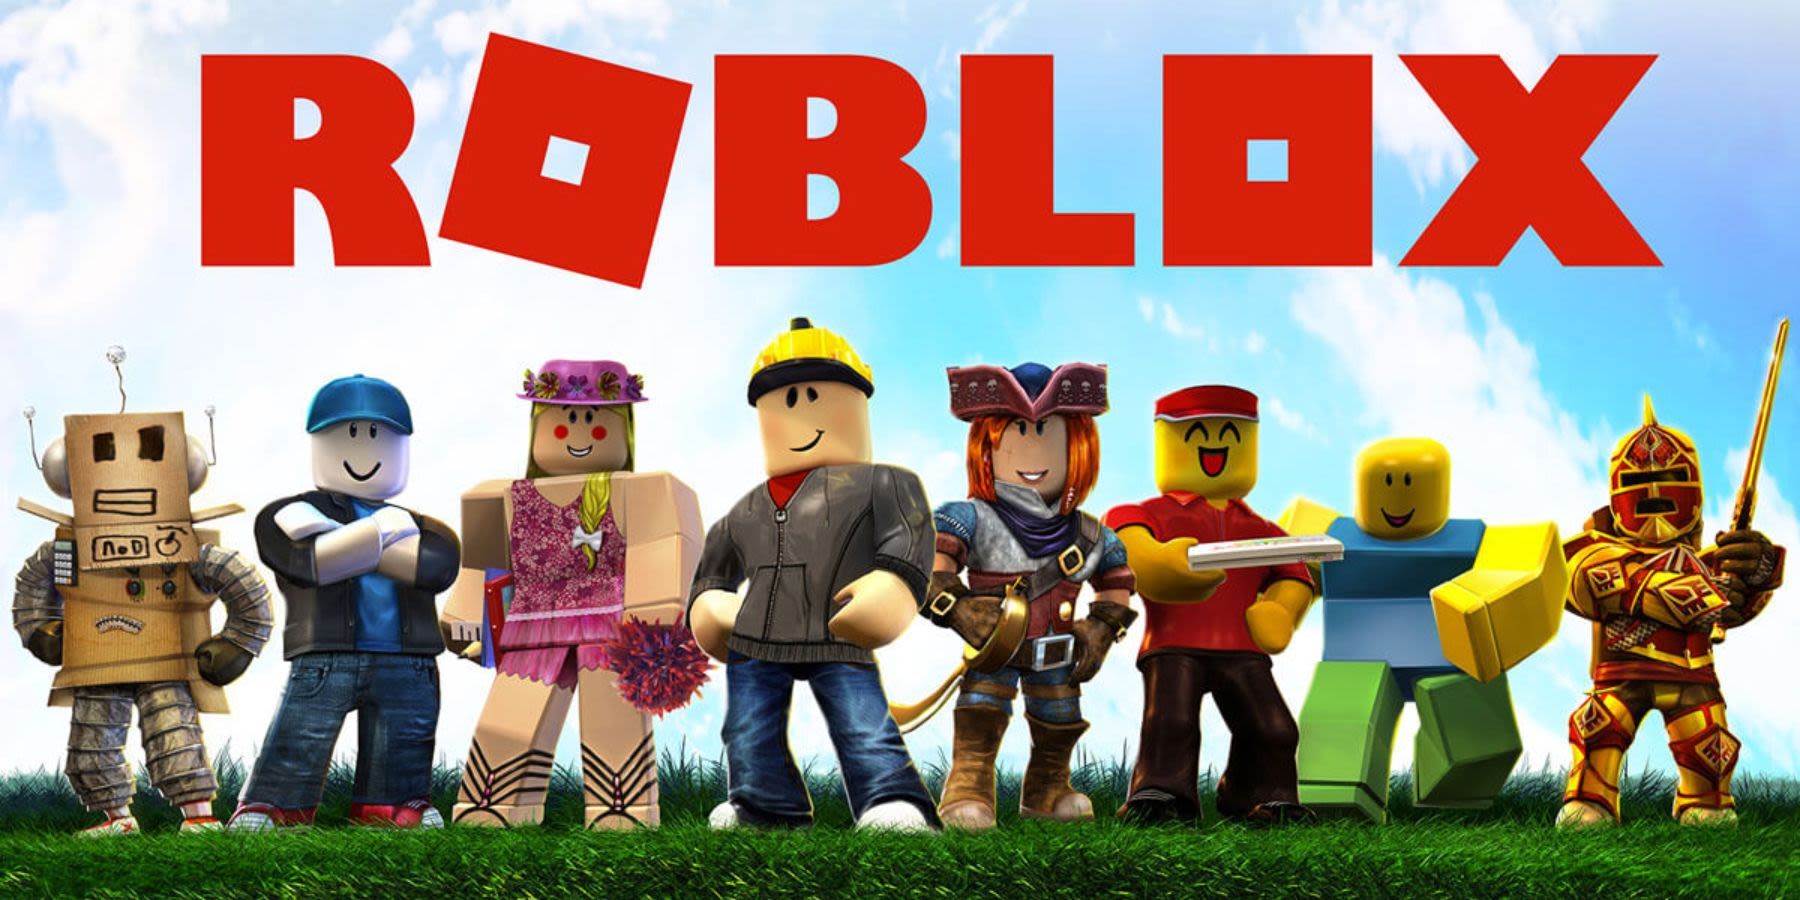 May 23 is Going to Be a Huge Day for Roblox